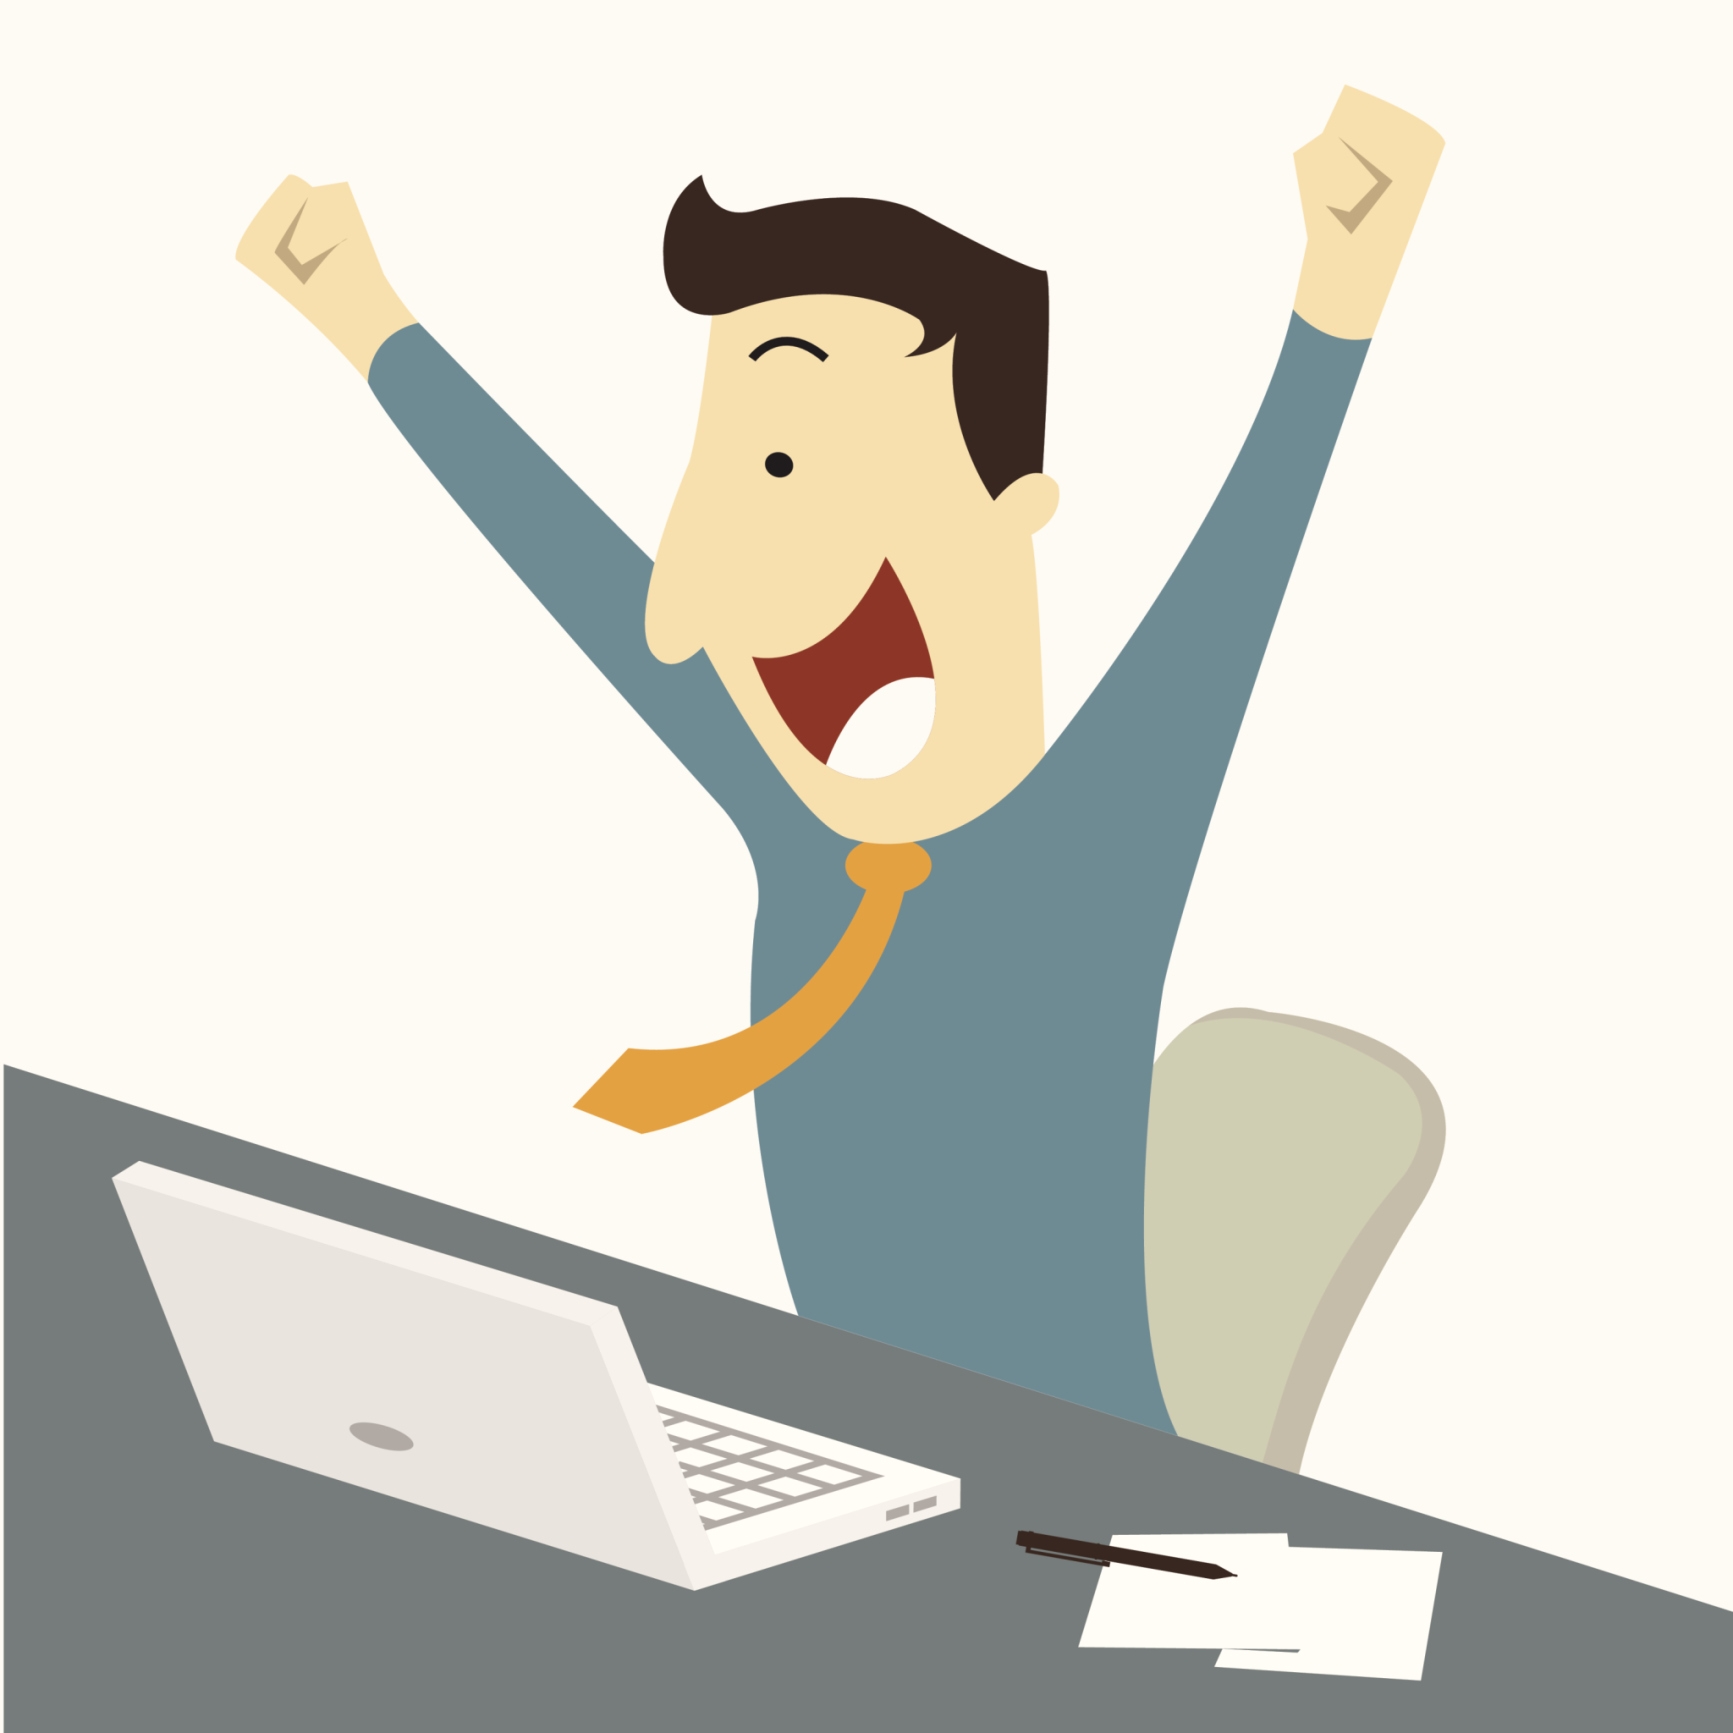 5 steps to finding happiness at work